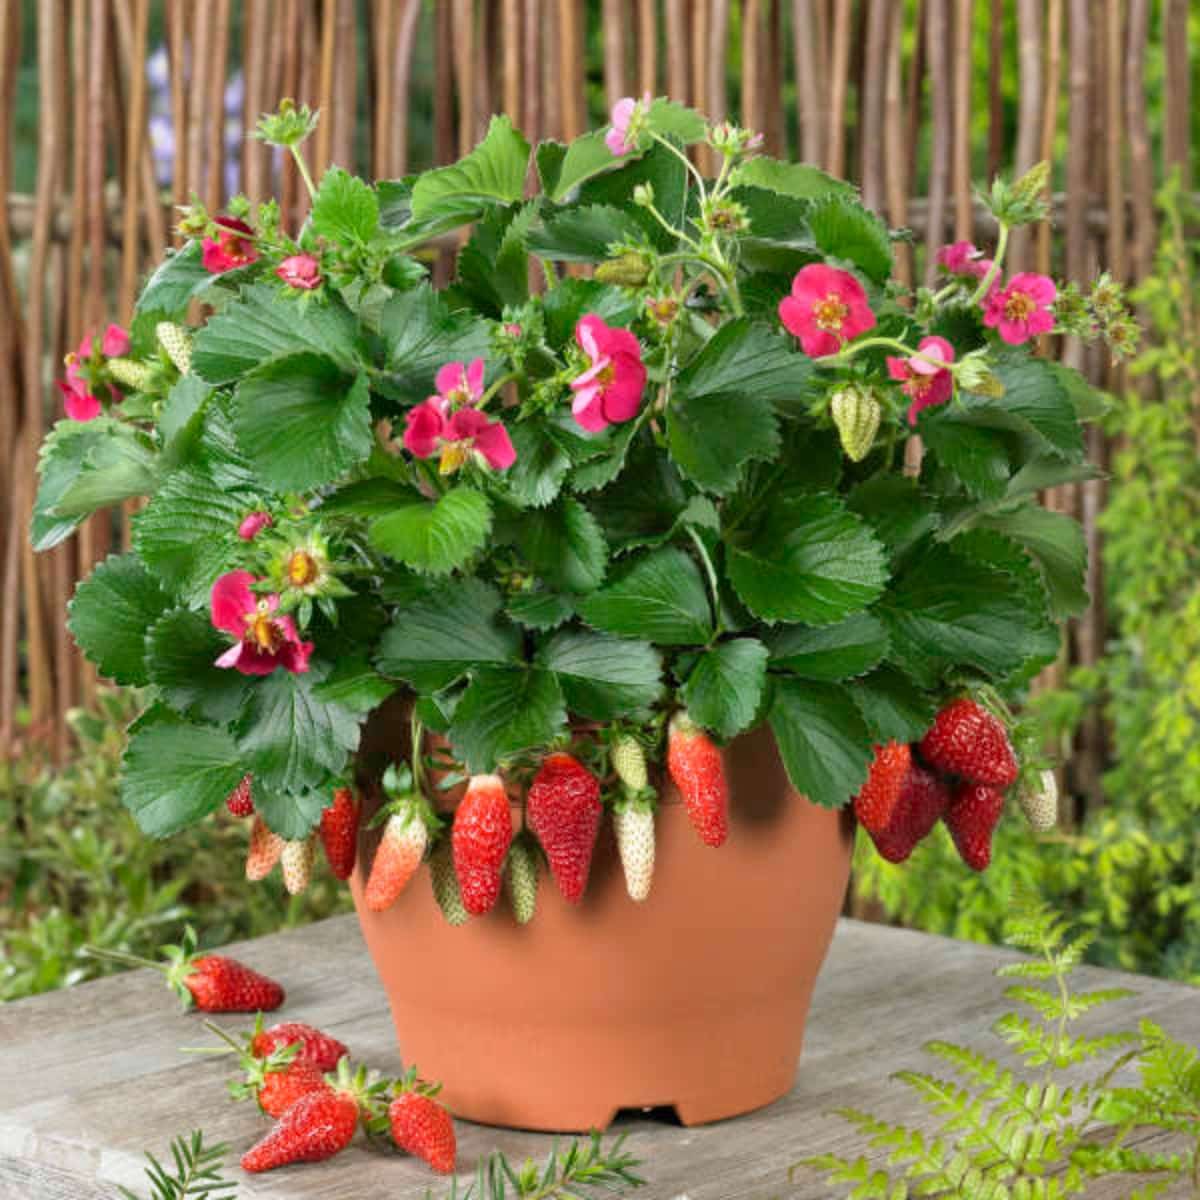 Tristan strawberry plant with ripe fruits growing in a pot.